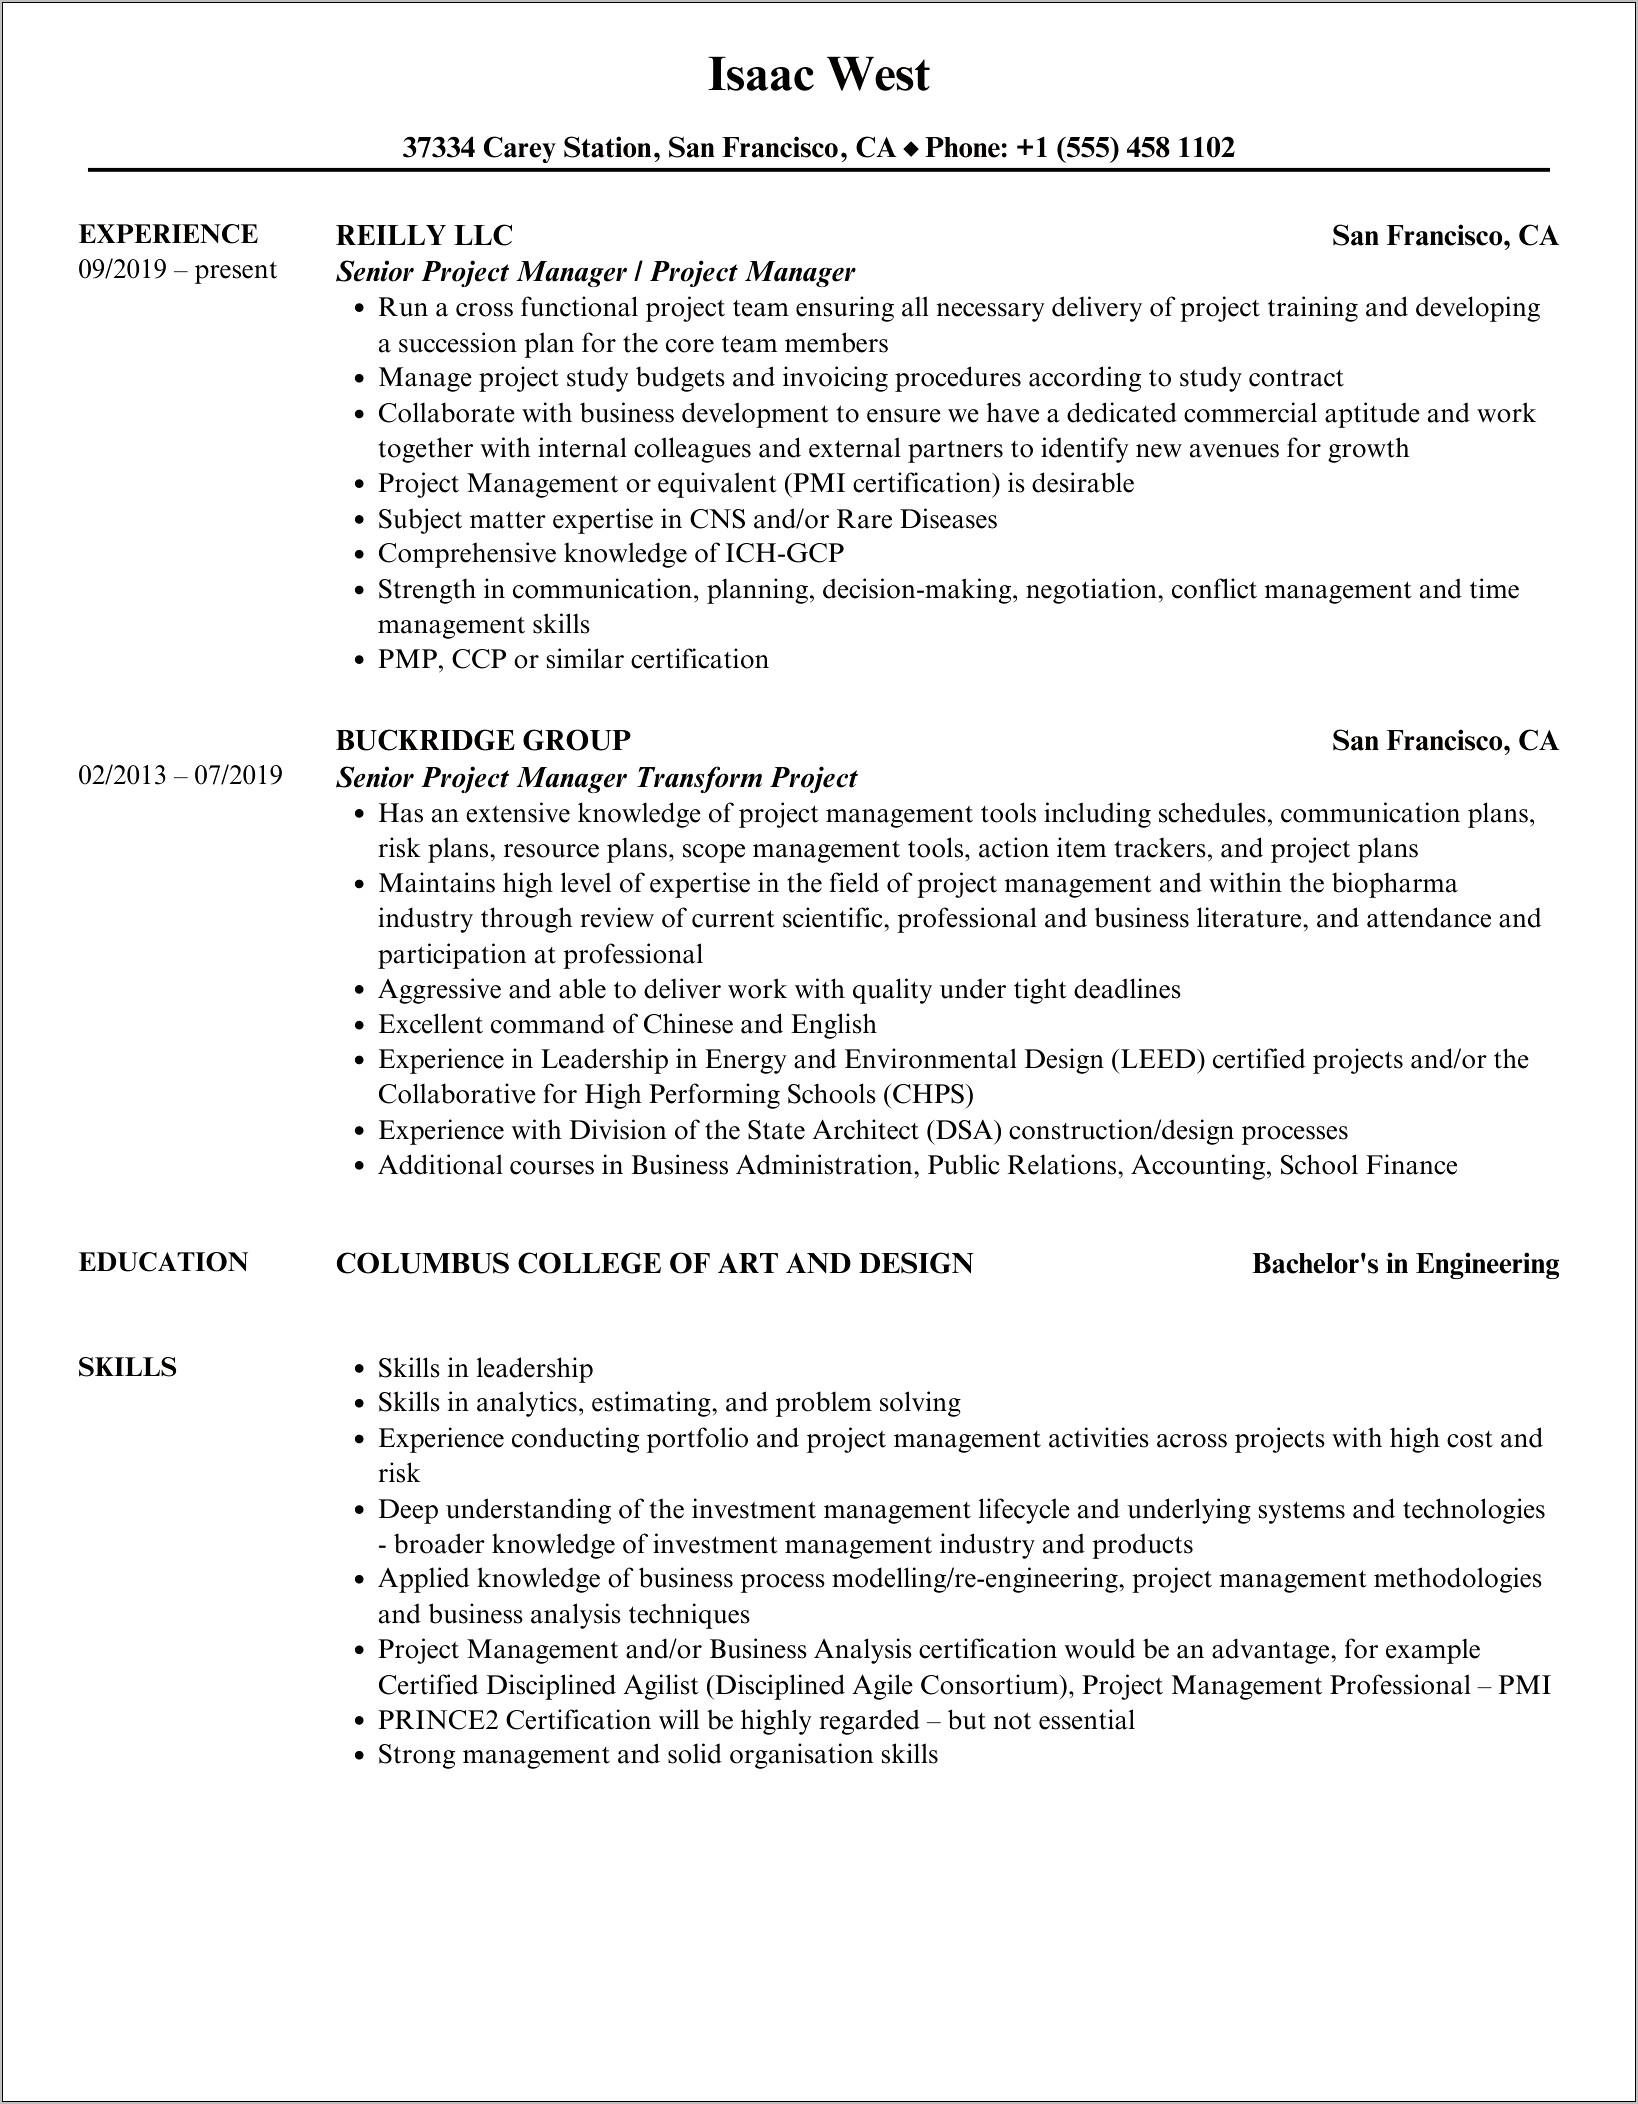 Senior Project Manager Resume Template